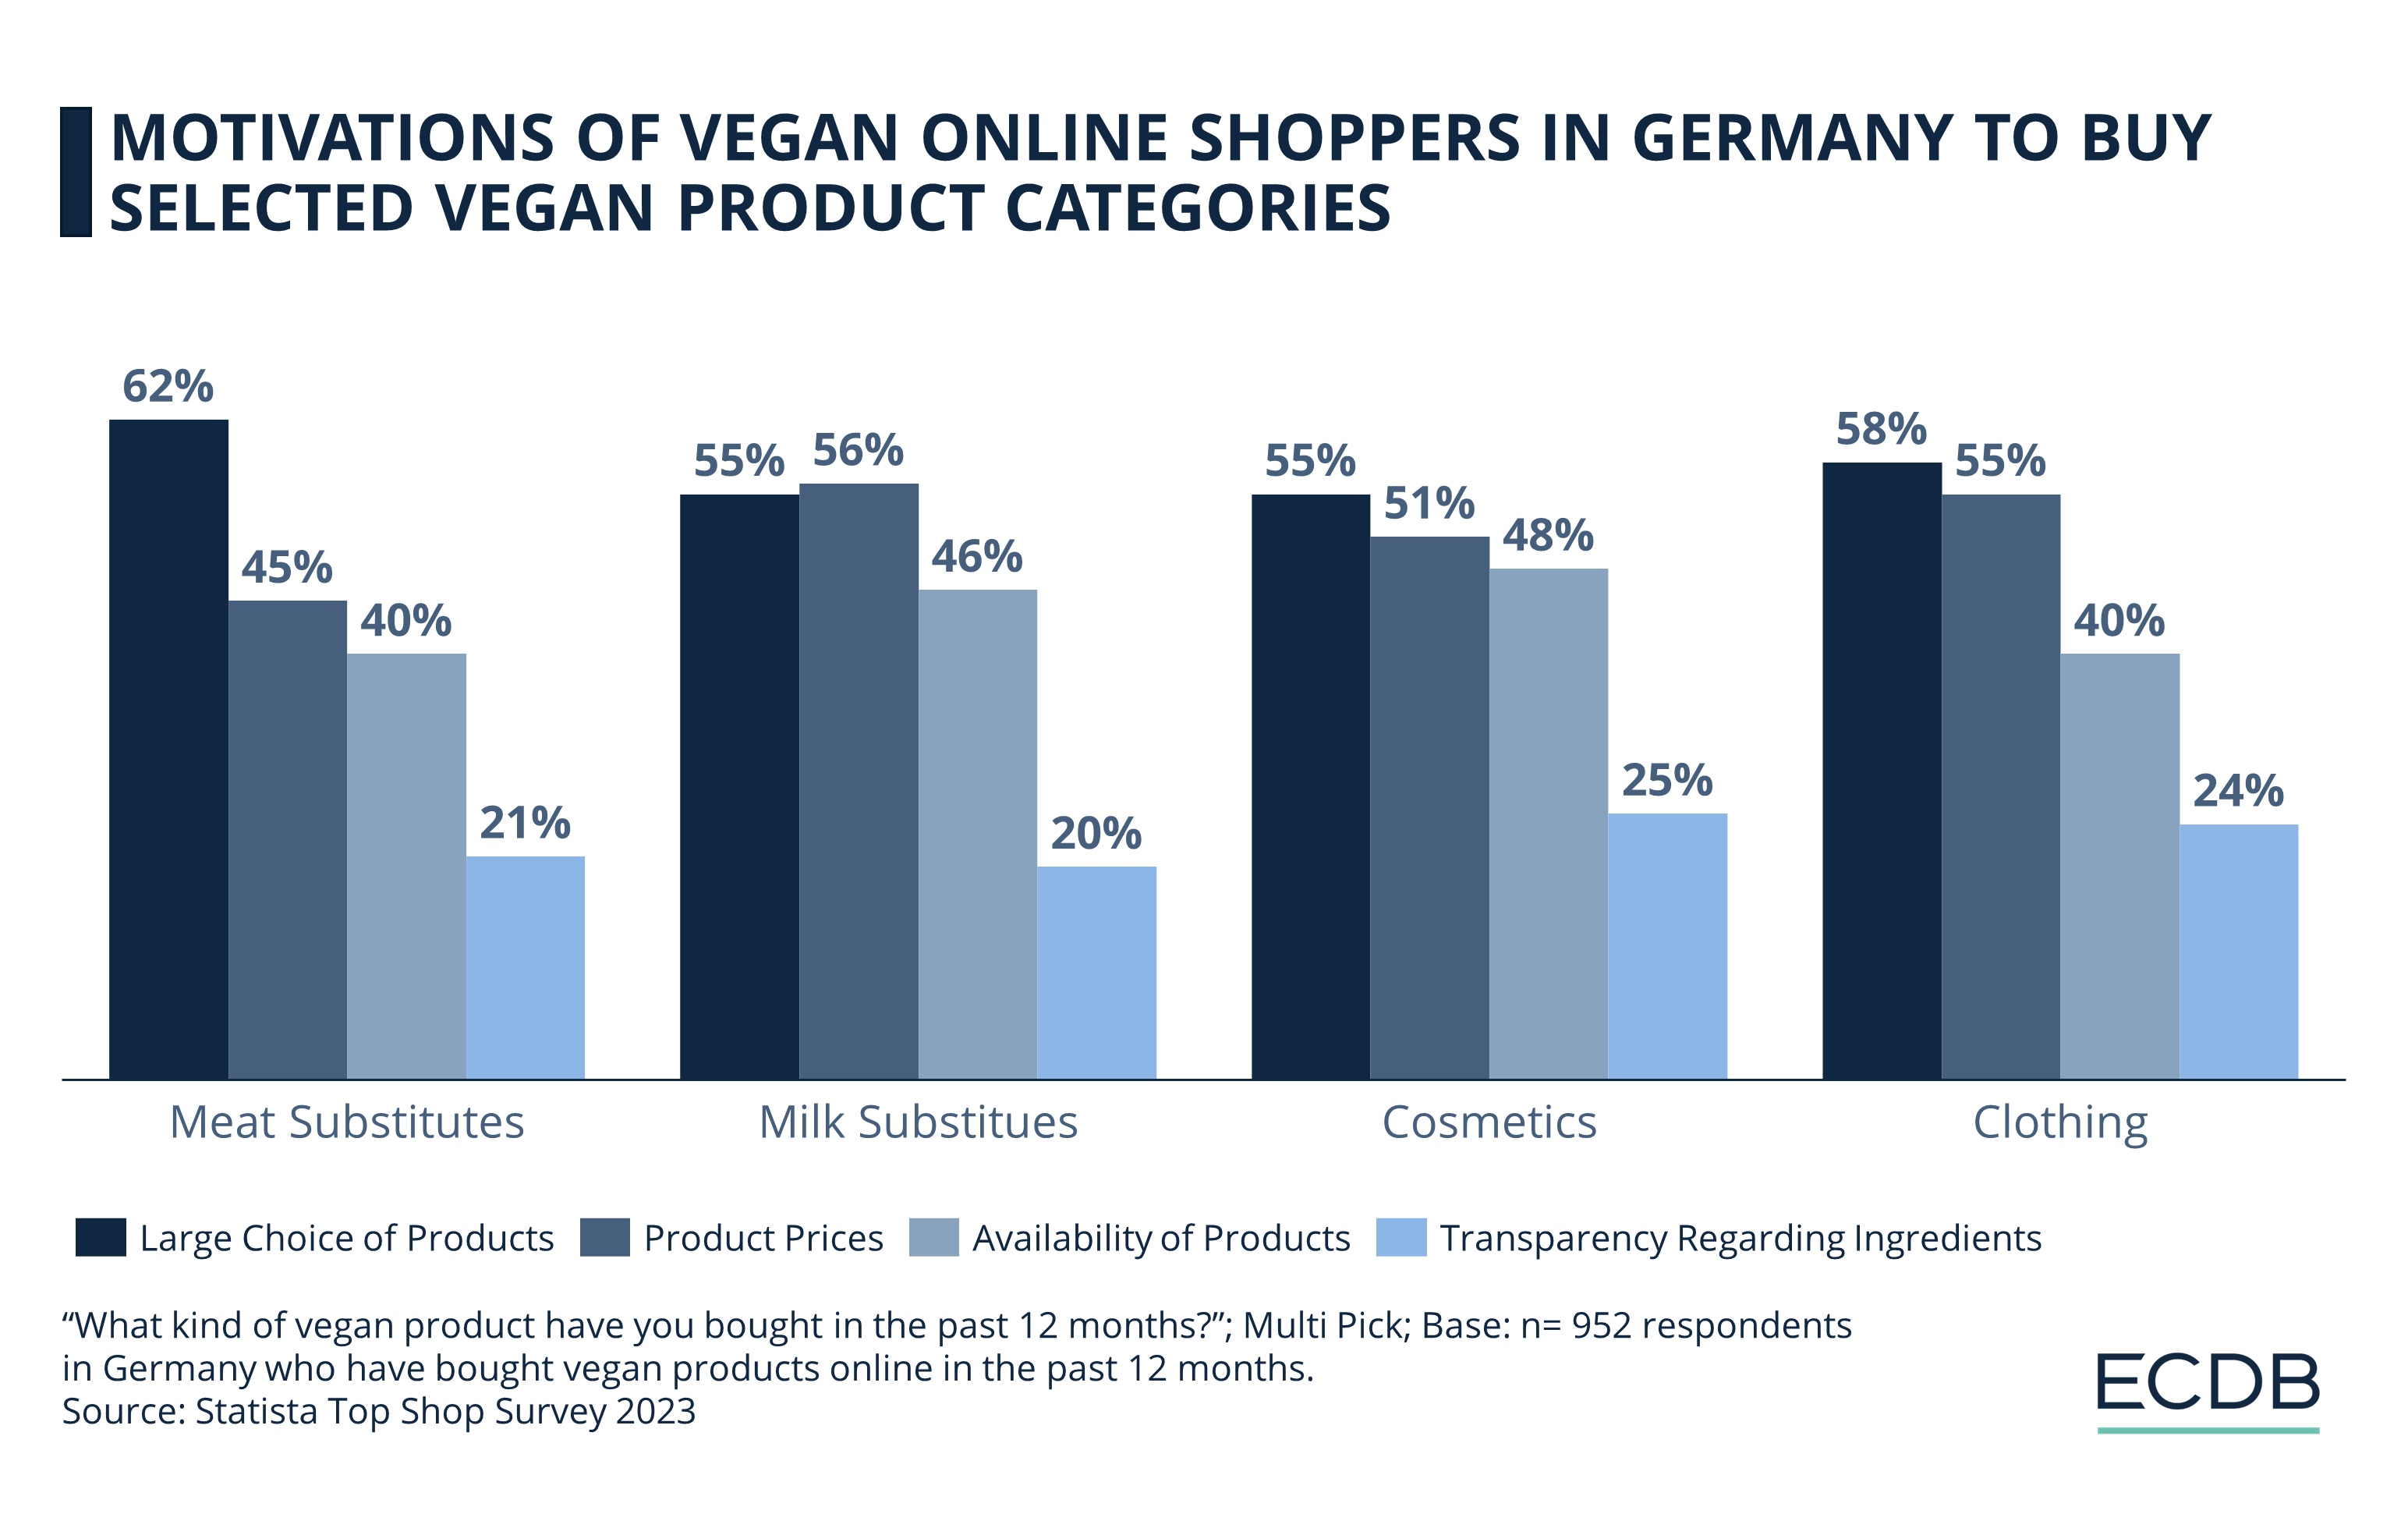 Motivations of Vegan Online Shoppers in Germany to Buy Selected Vegan Product Categories